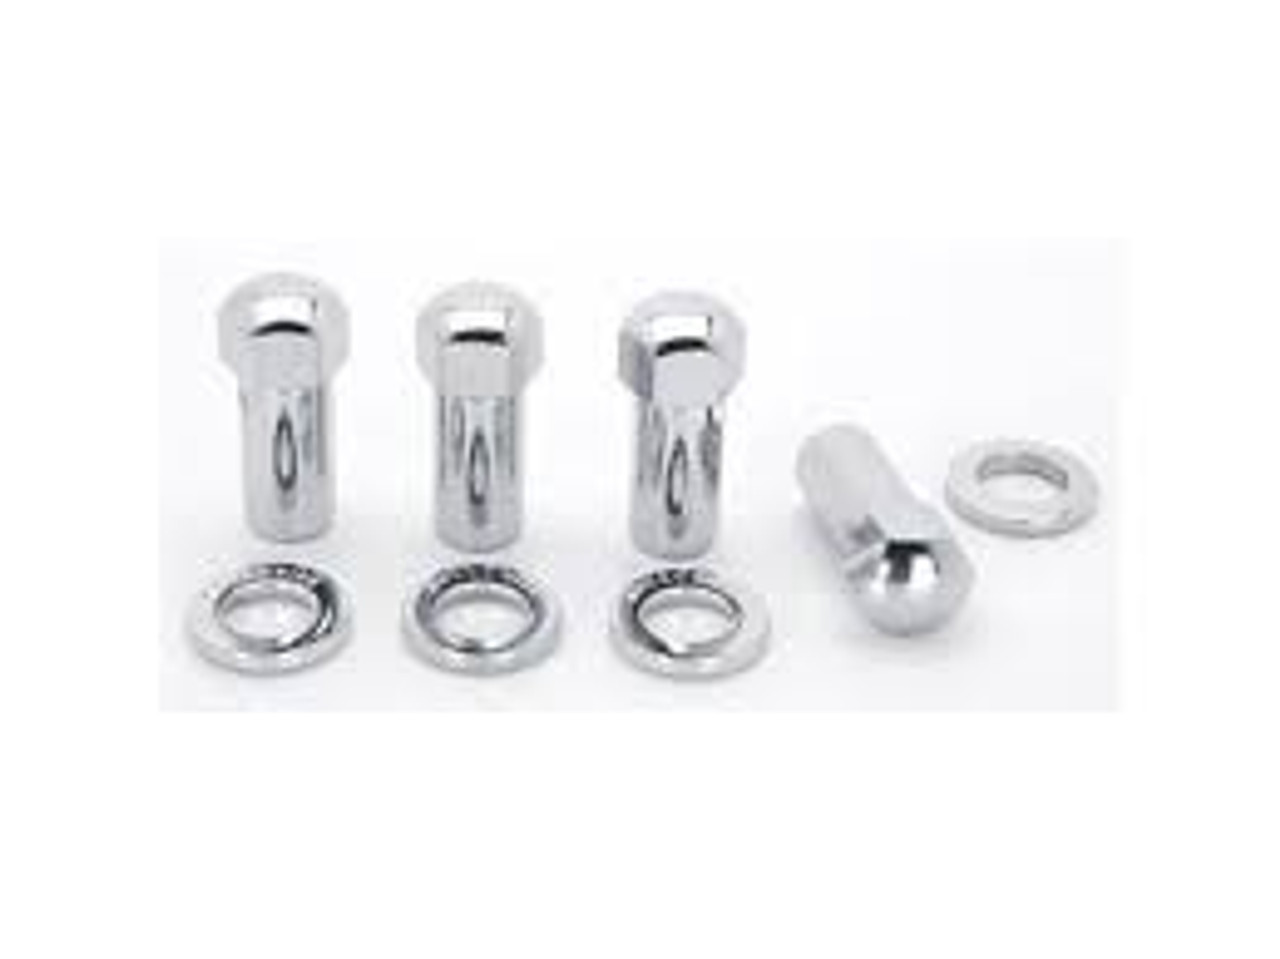 Weld Closed End Lug Nuts 12mm x 1.5 Thread Shank Seat - Chrome (4 Pack) - 601-1412